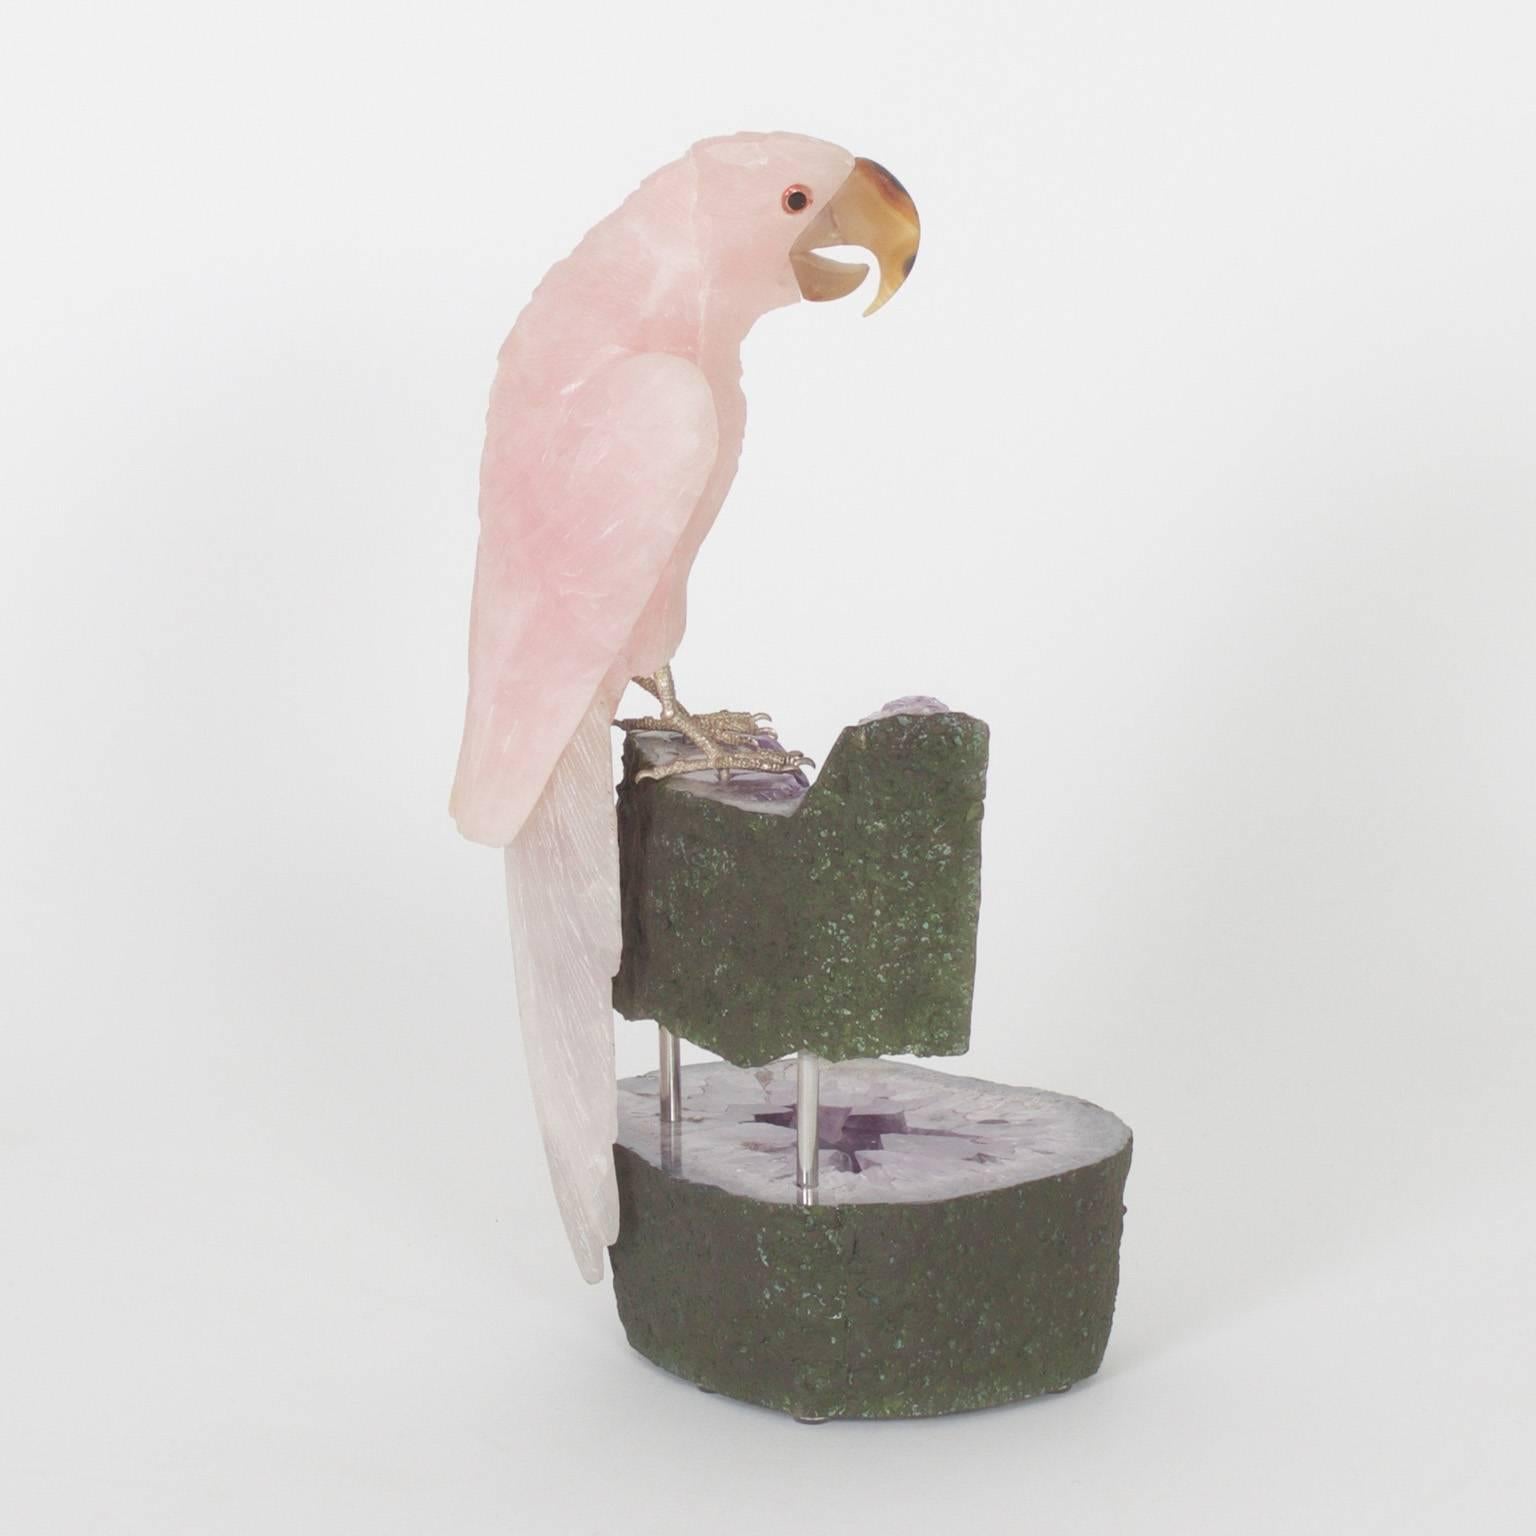 Parrot sculpture expertly carved from rose quartz with an amusing expression and an agate beak, presented on a two-piece geode stand.

.